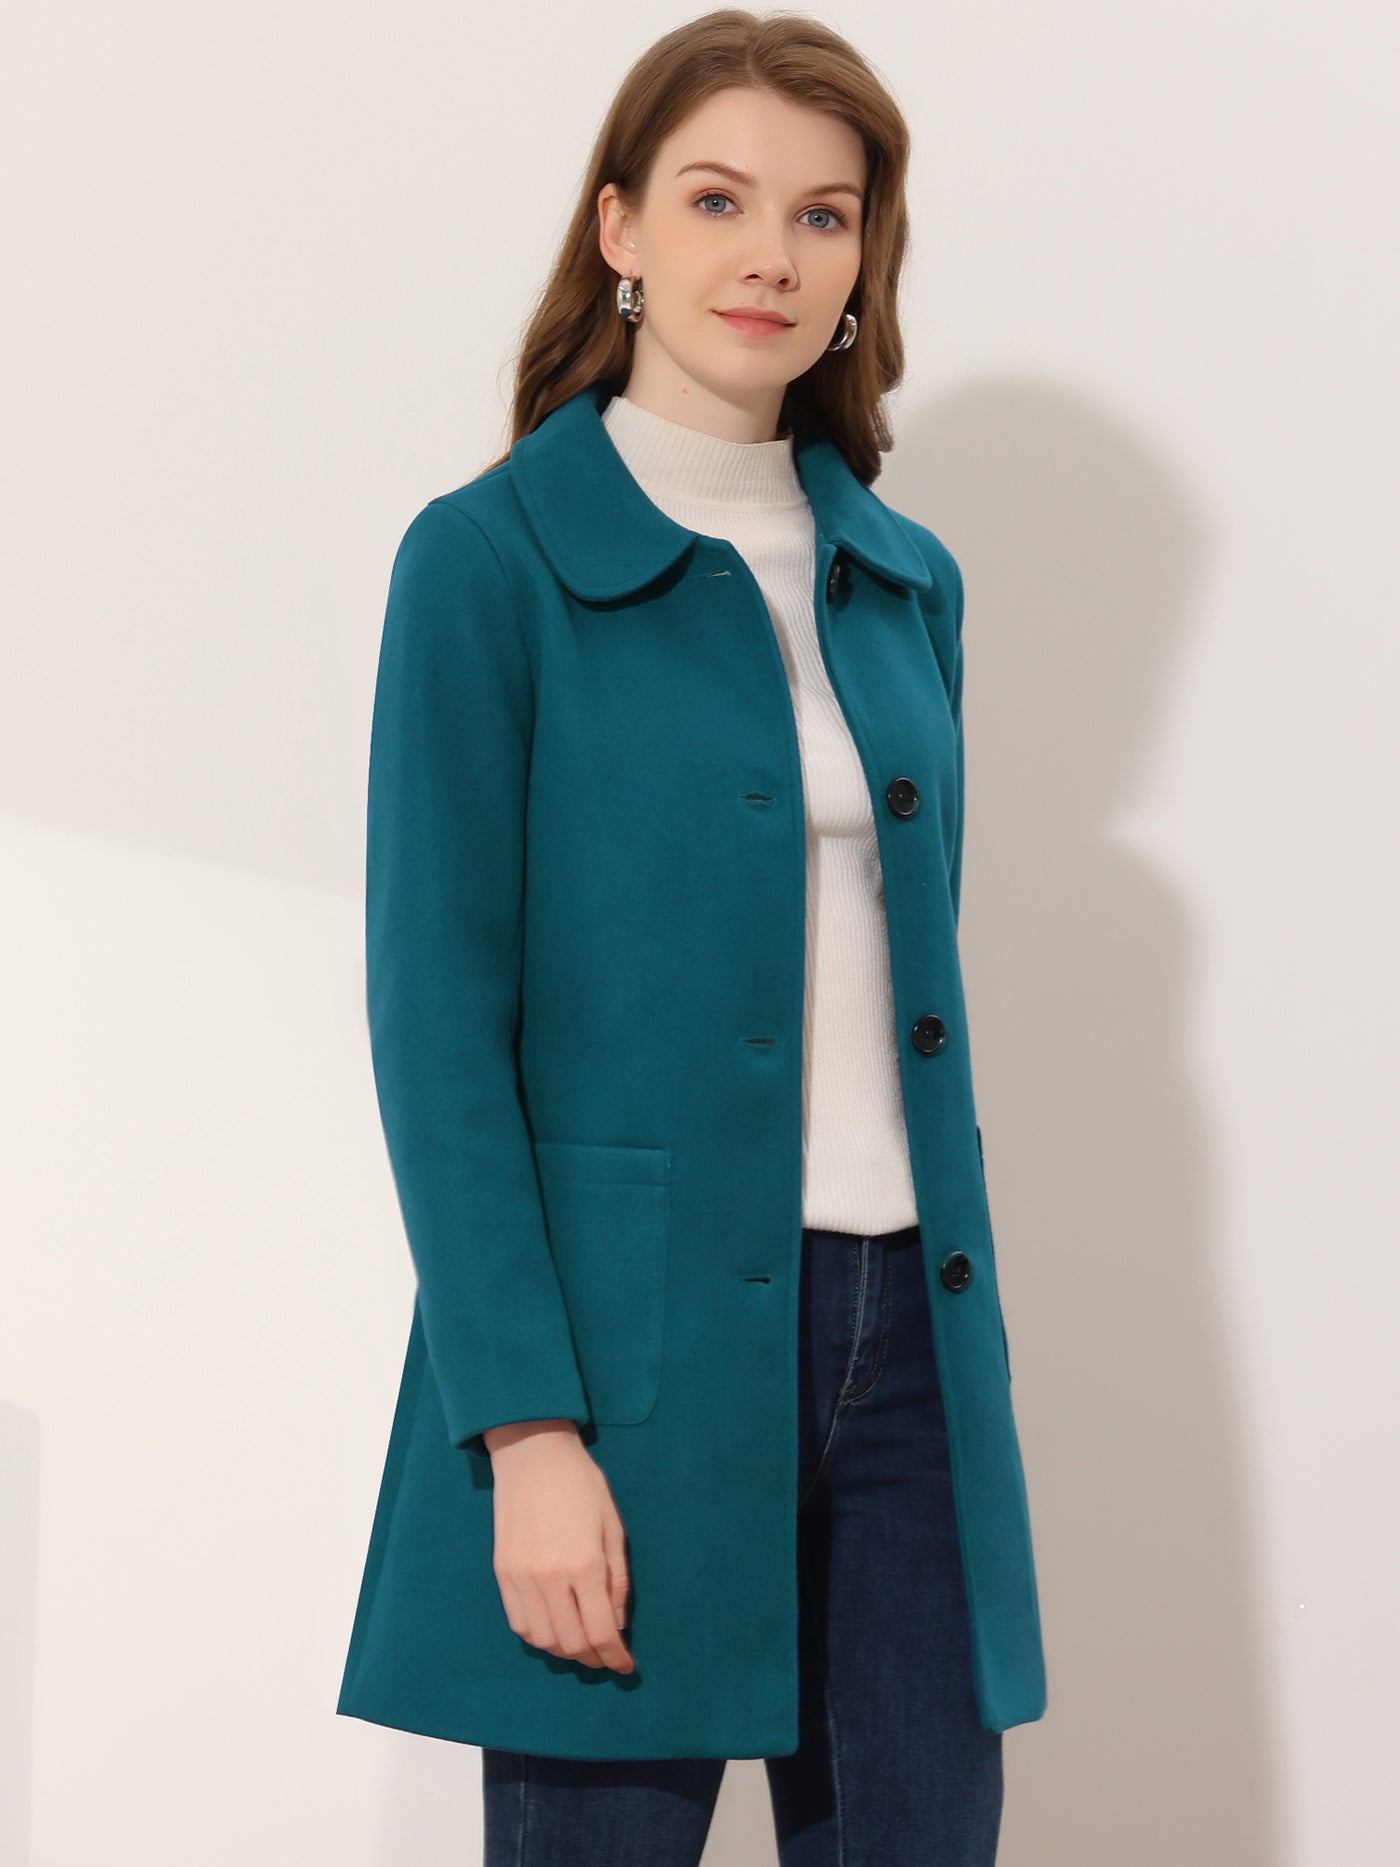 Allegra K Turn Down Collar Single Breasted Winter Outwear Trench Coat